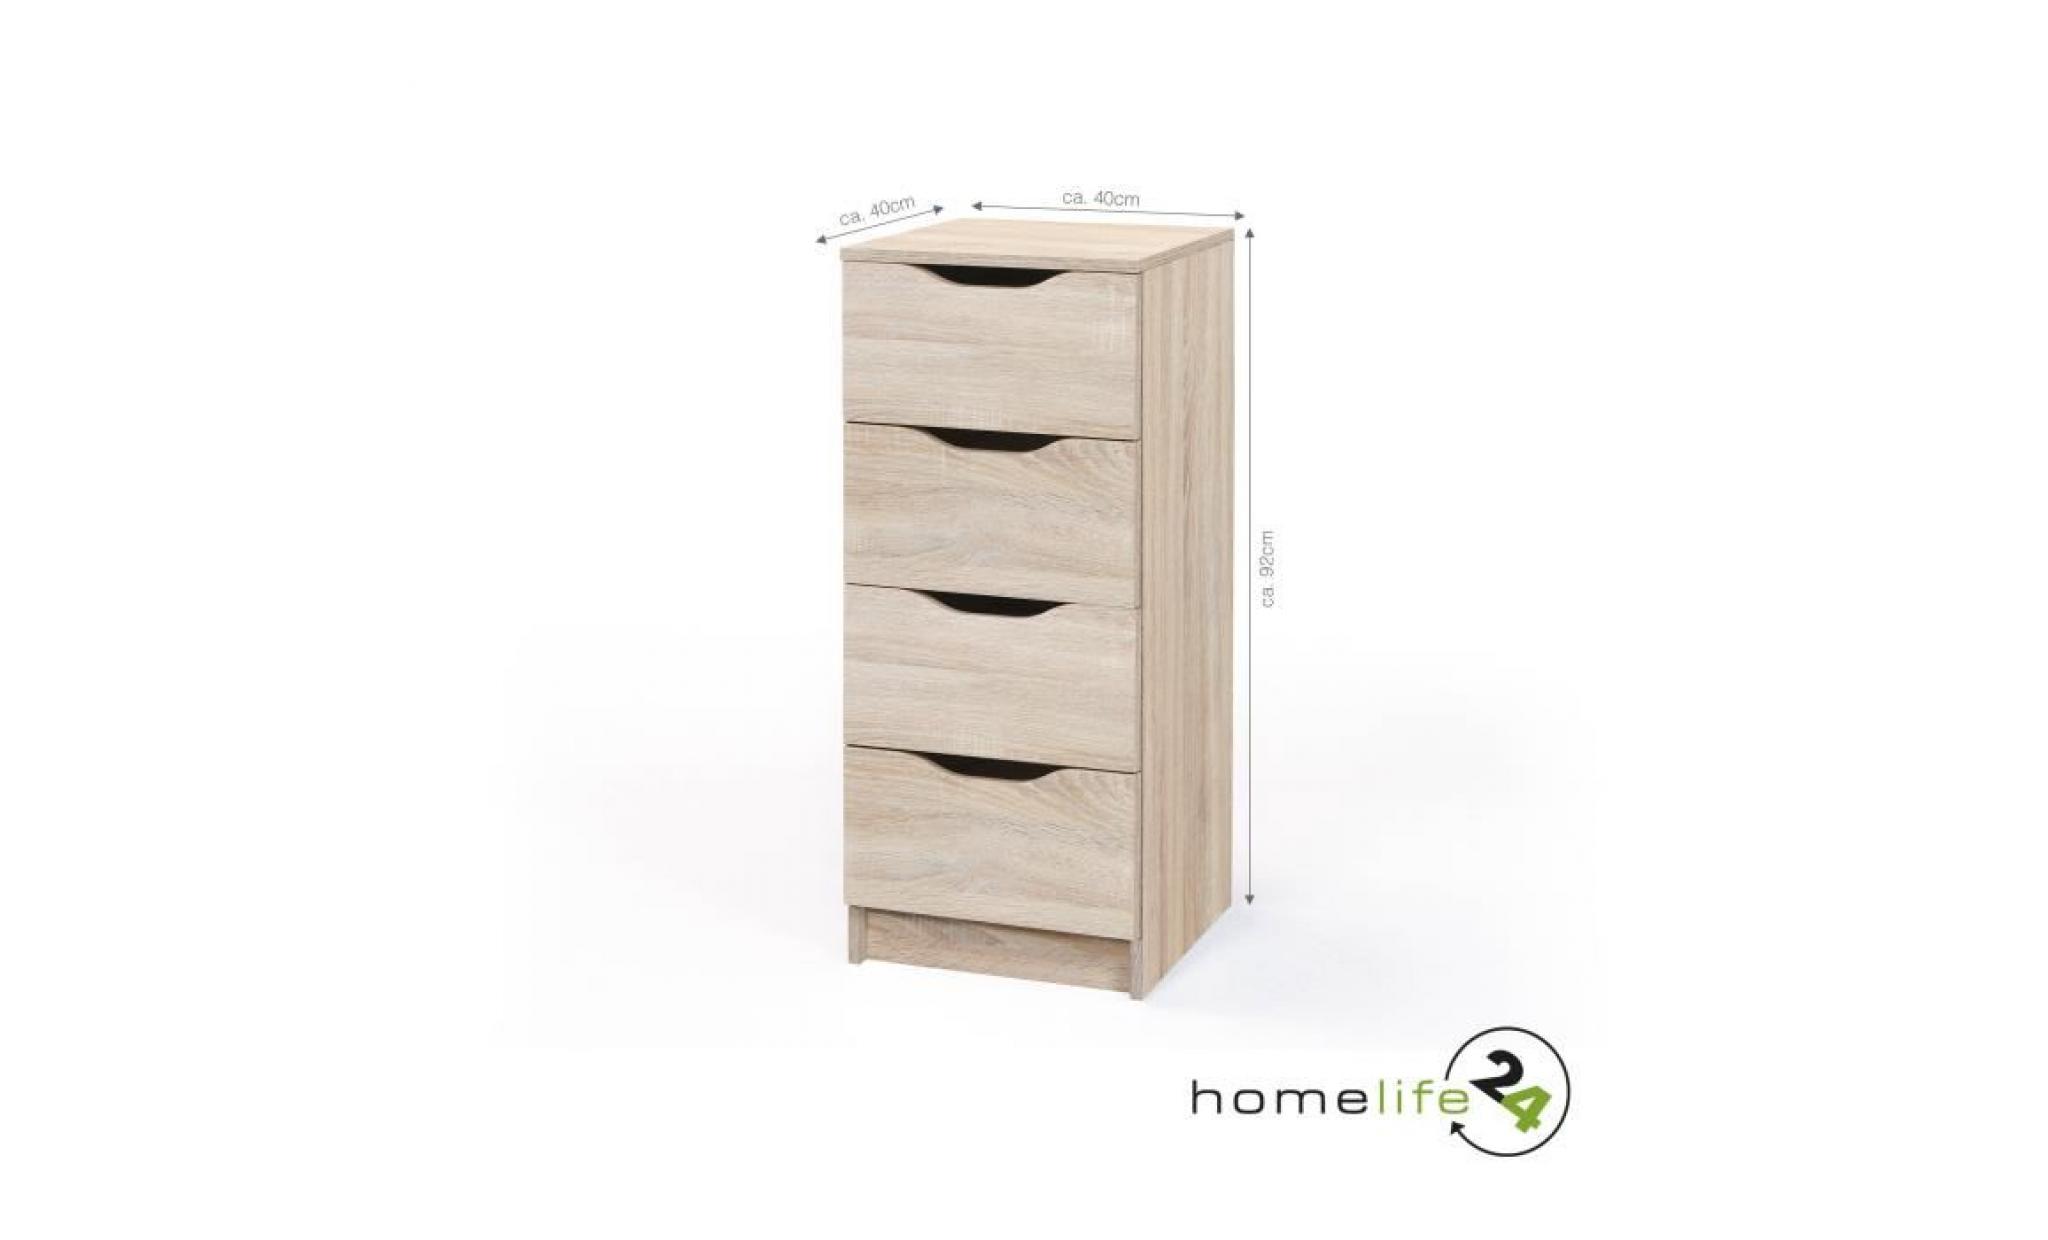 commode 4 tiroirs, commode chambre chene, commode enfant, commode haute, chene sonoma, commode pas cher, commode chambre adulte pas cher